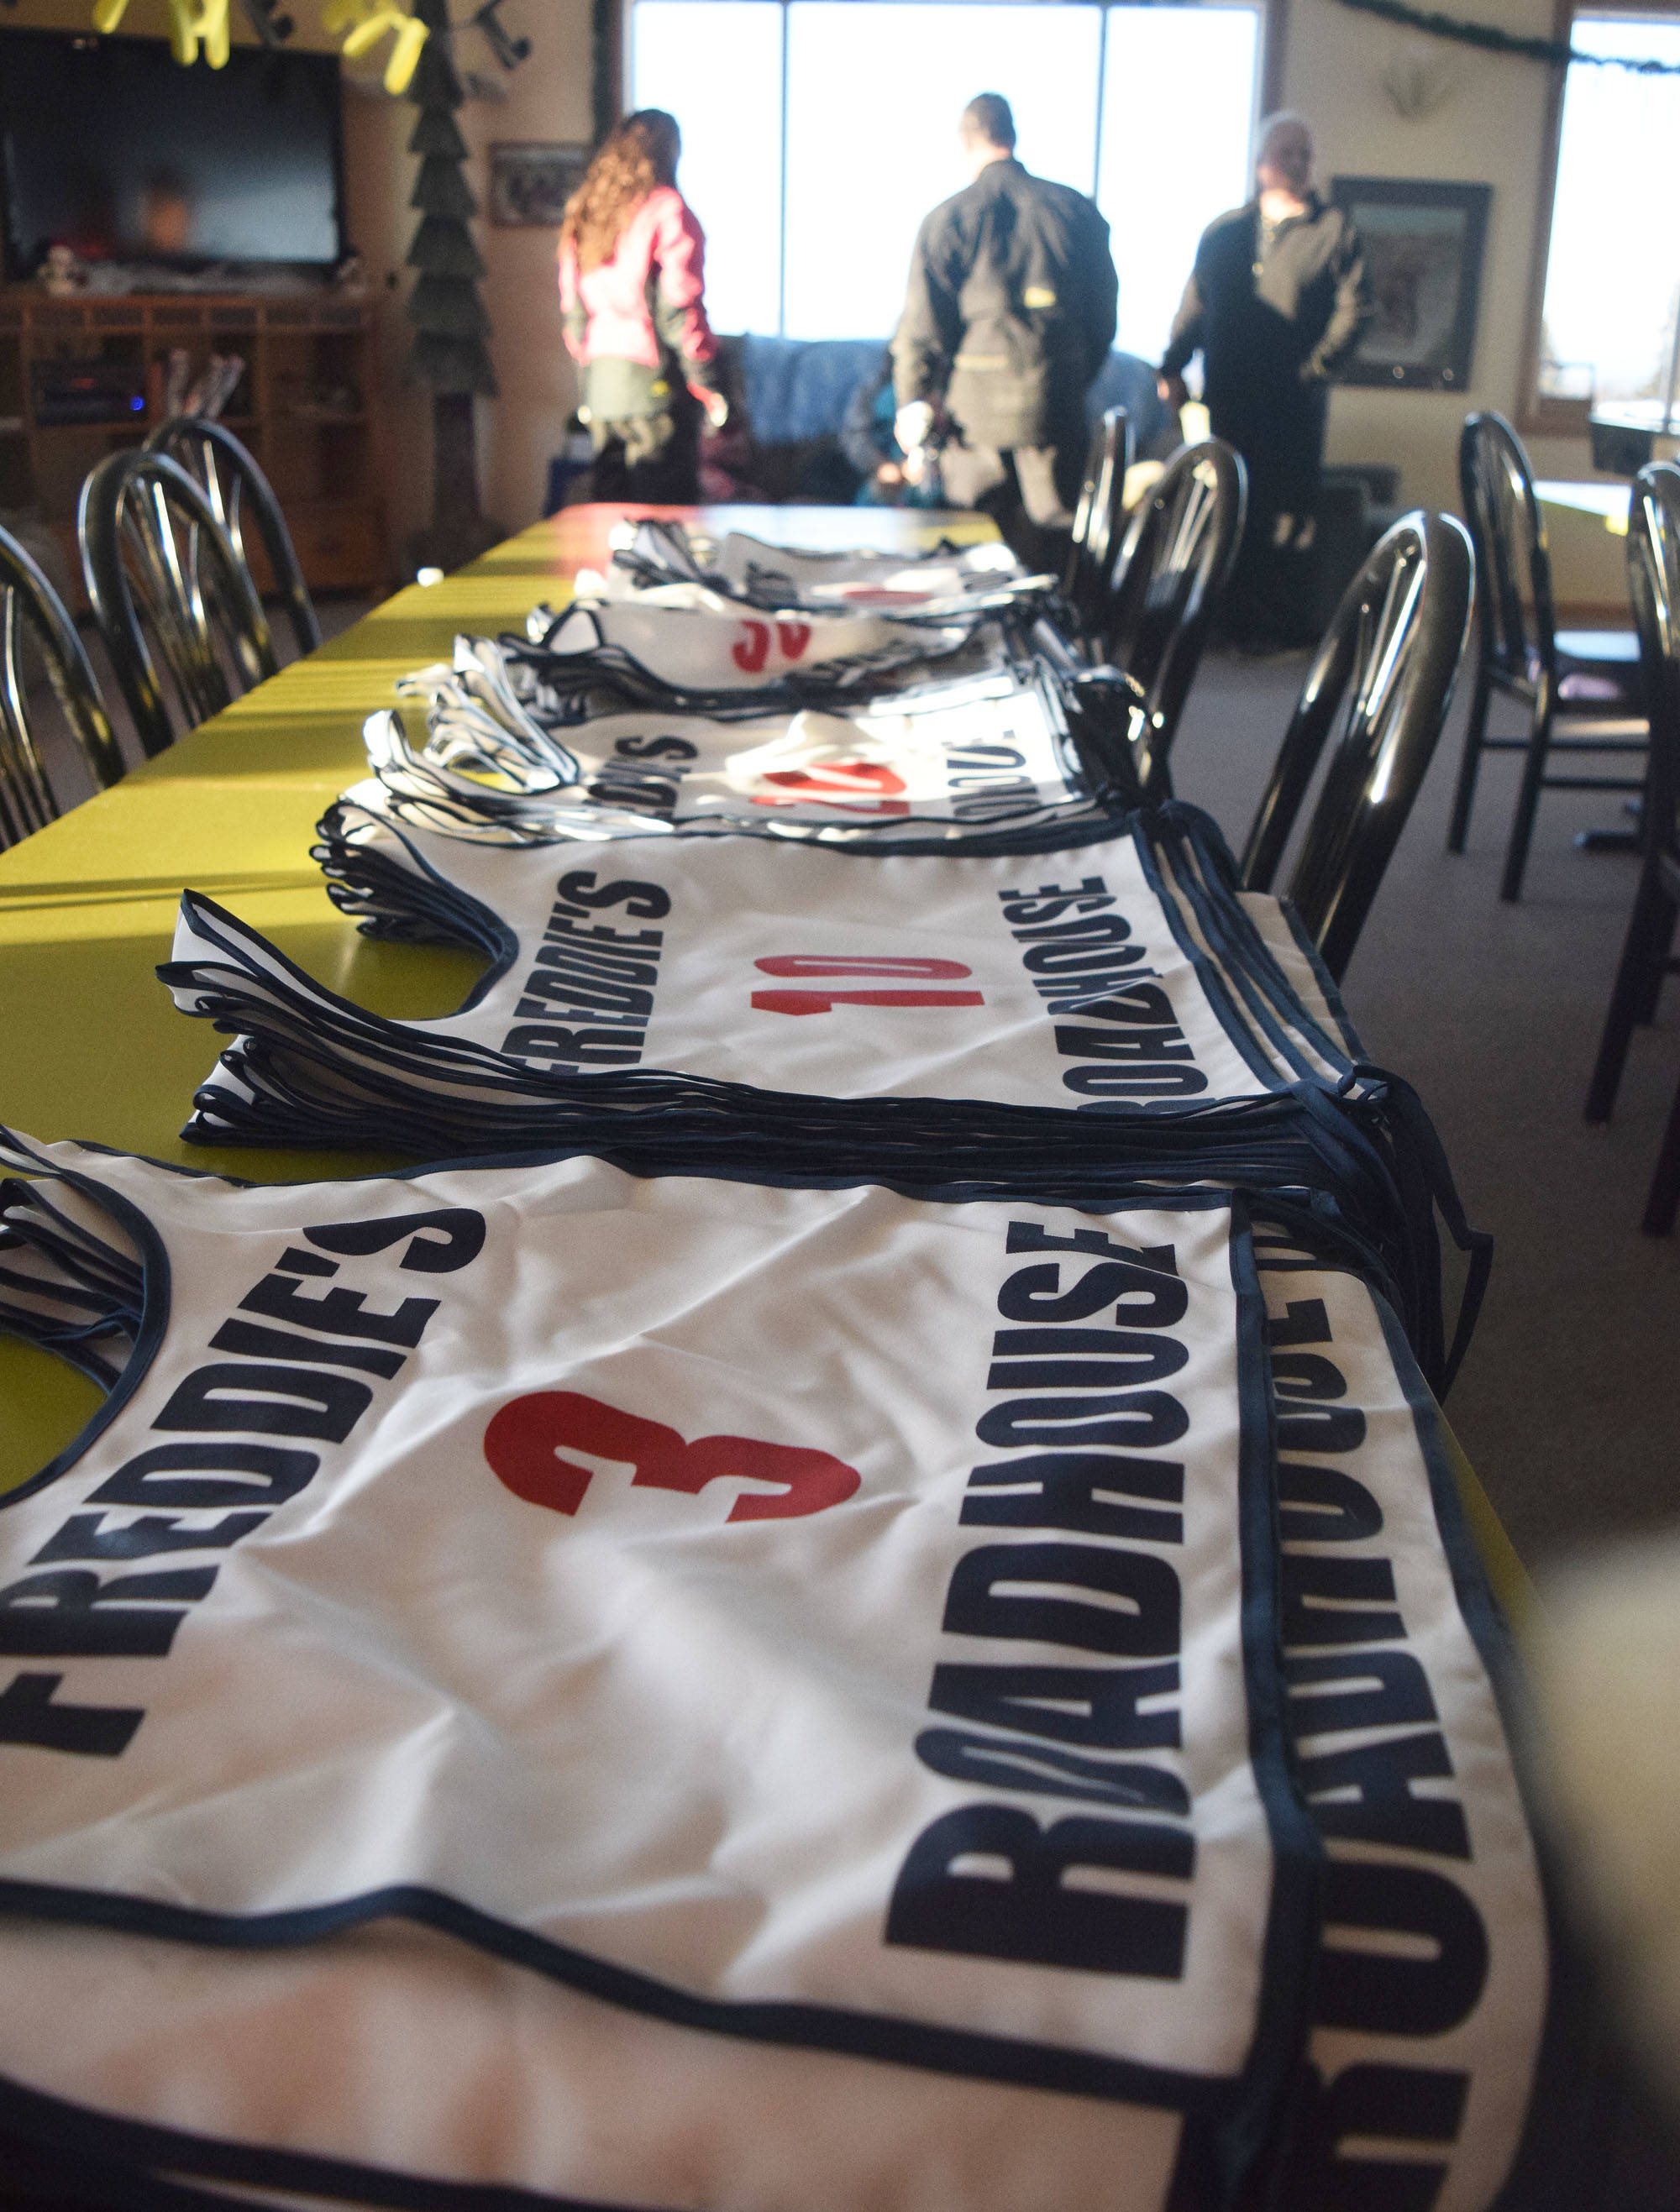 Piles of racing bibs wait to be claimed by contestants Saturday afternoon at the snowmachine drag races at Freddie’s Roadhouse near Ninilchik. (Photo by Joey Klecka/Peninsula Clarion)